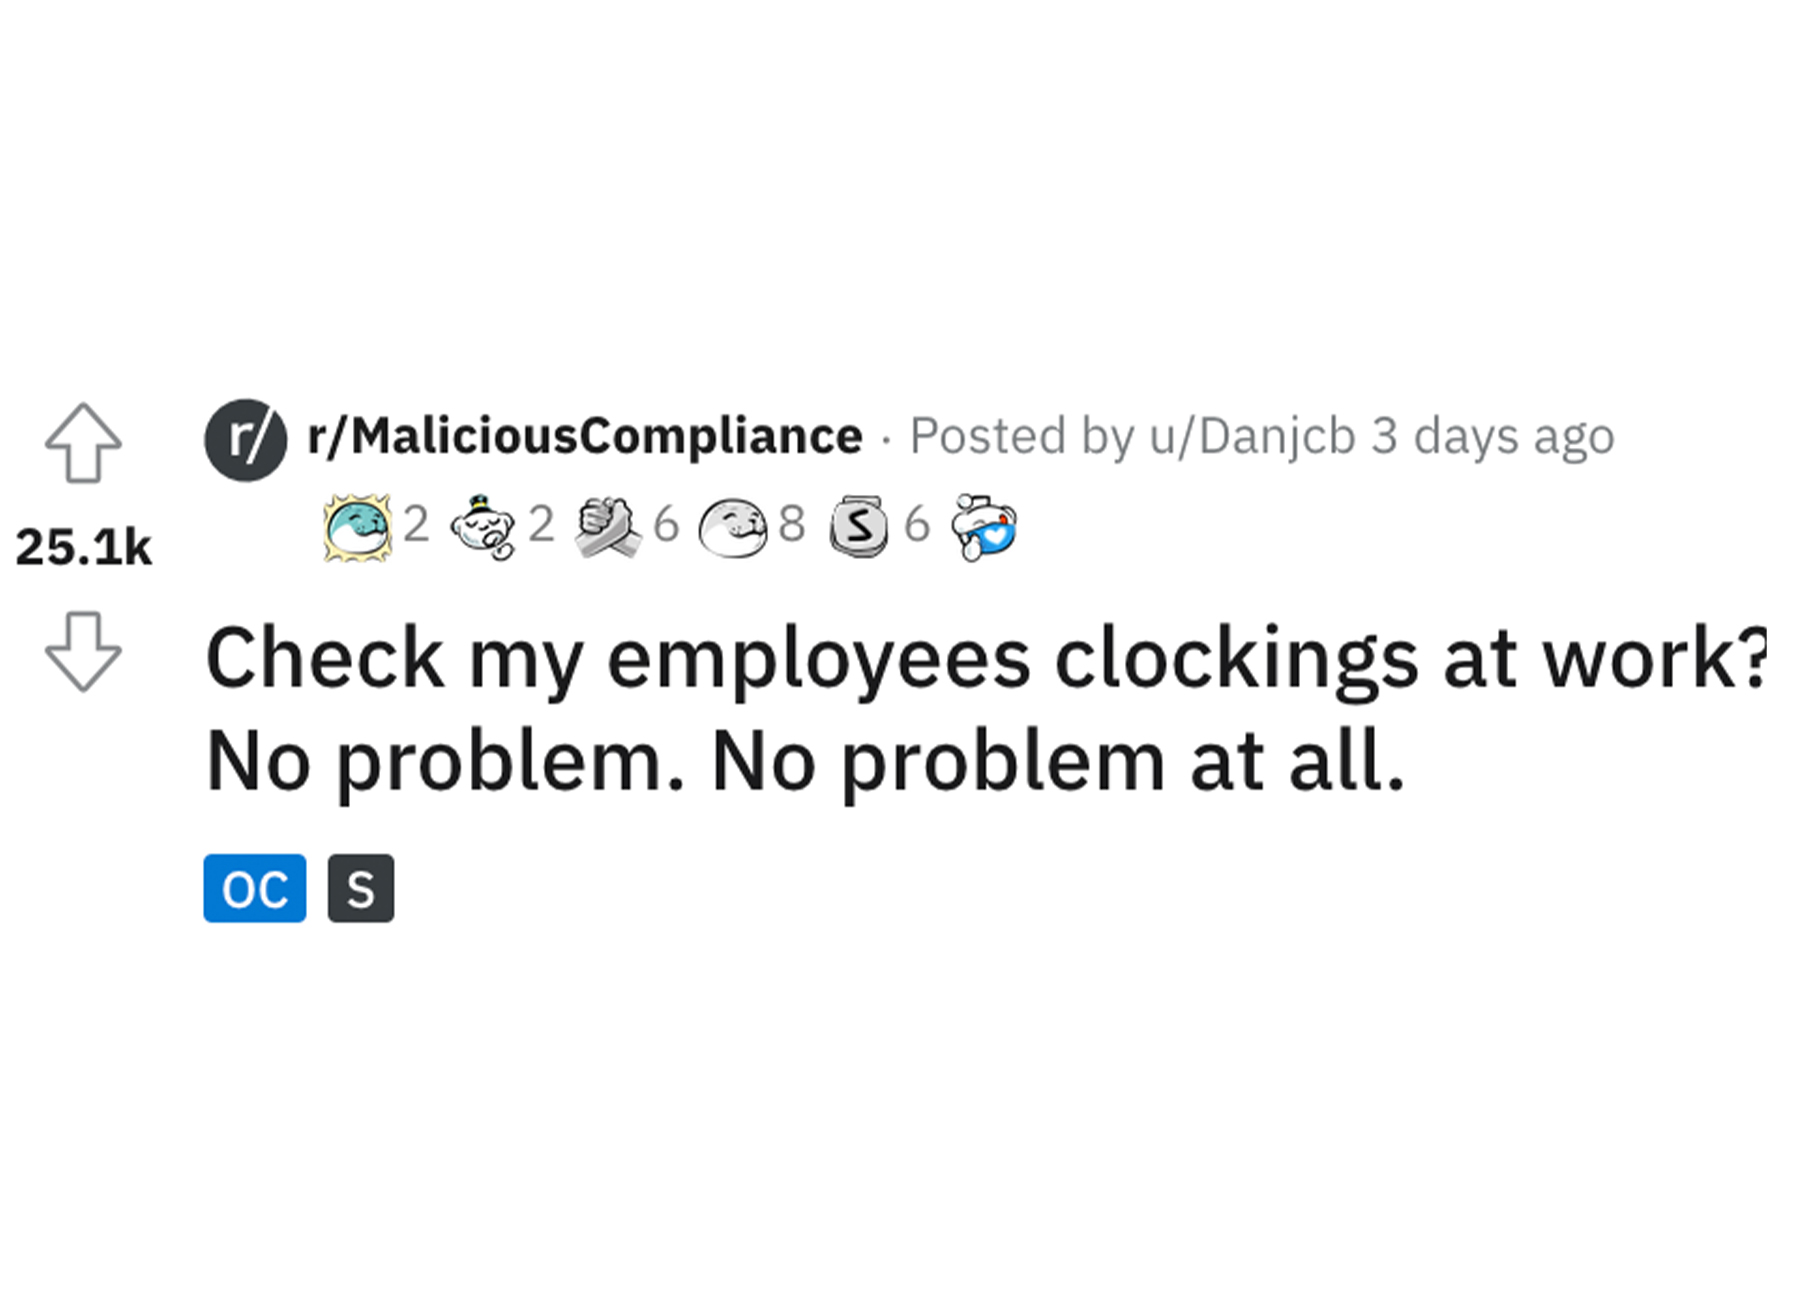 Supervisor Sticks it to Cheap Boss - kontrowersyjne reklamy - rrMaliciousCompliance Posted by uDanjcb 3 days ago 226 26 @ 8 3 6 Check my employees clockings at work? No problem. No problem at all. Oc S